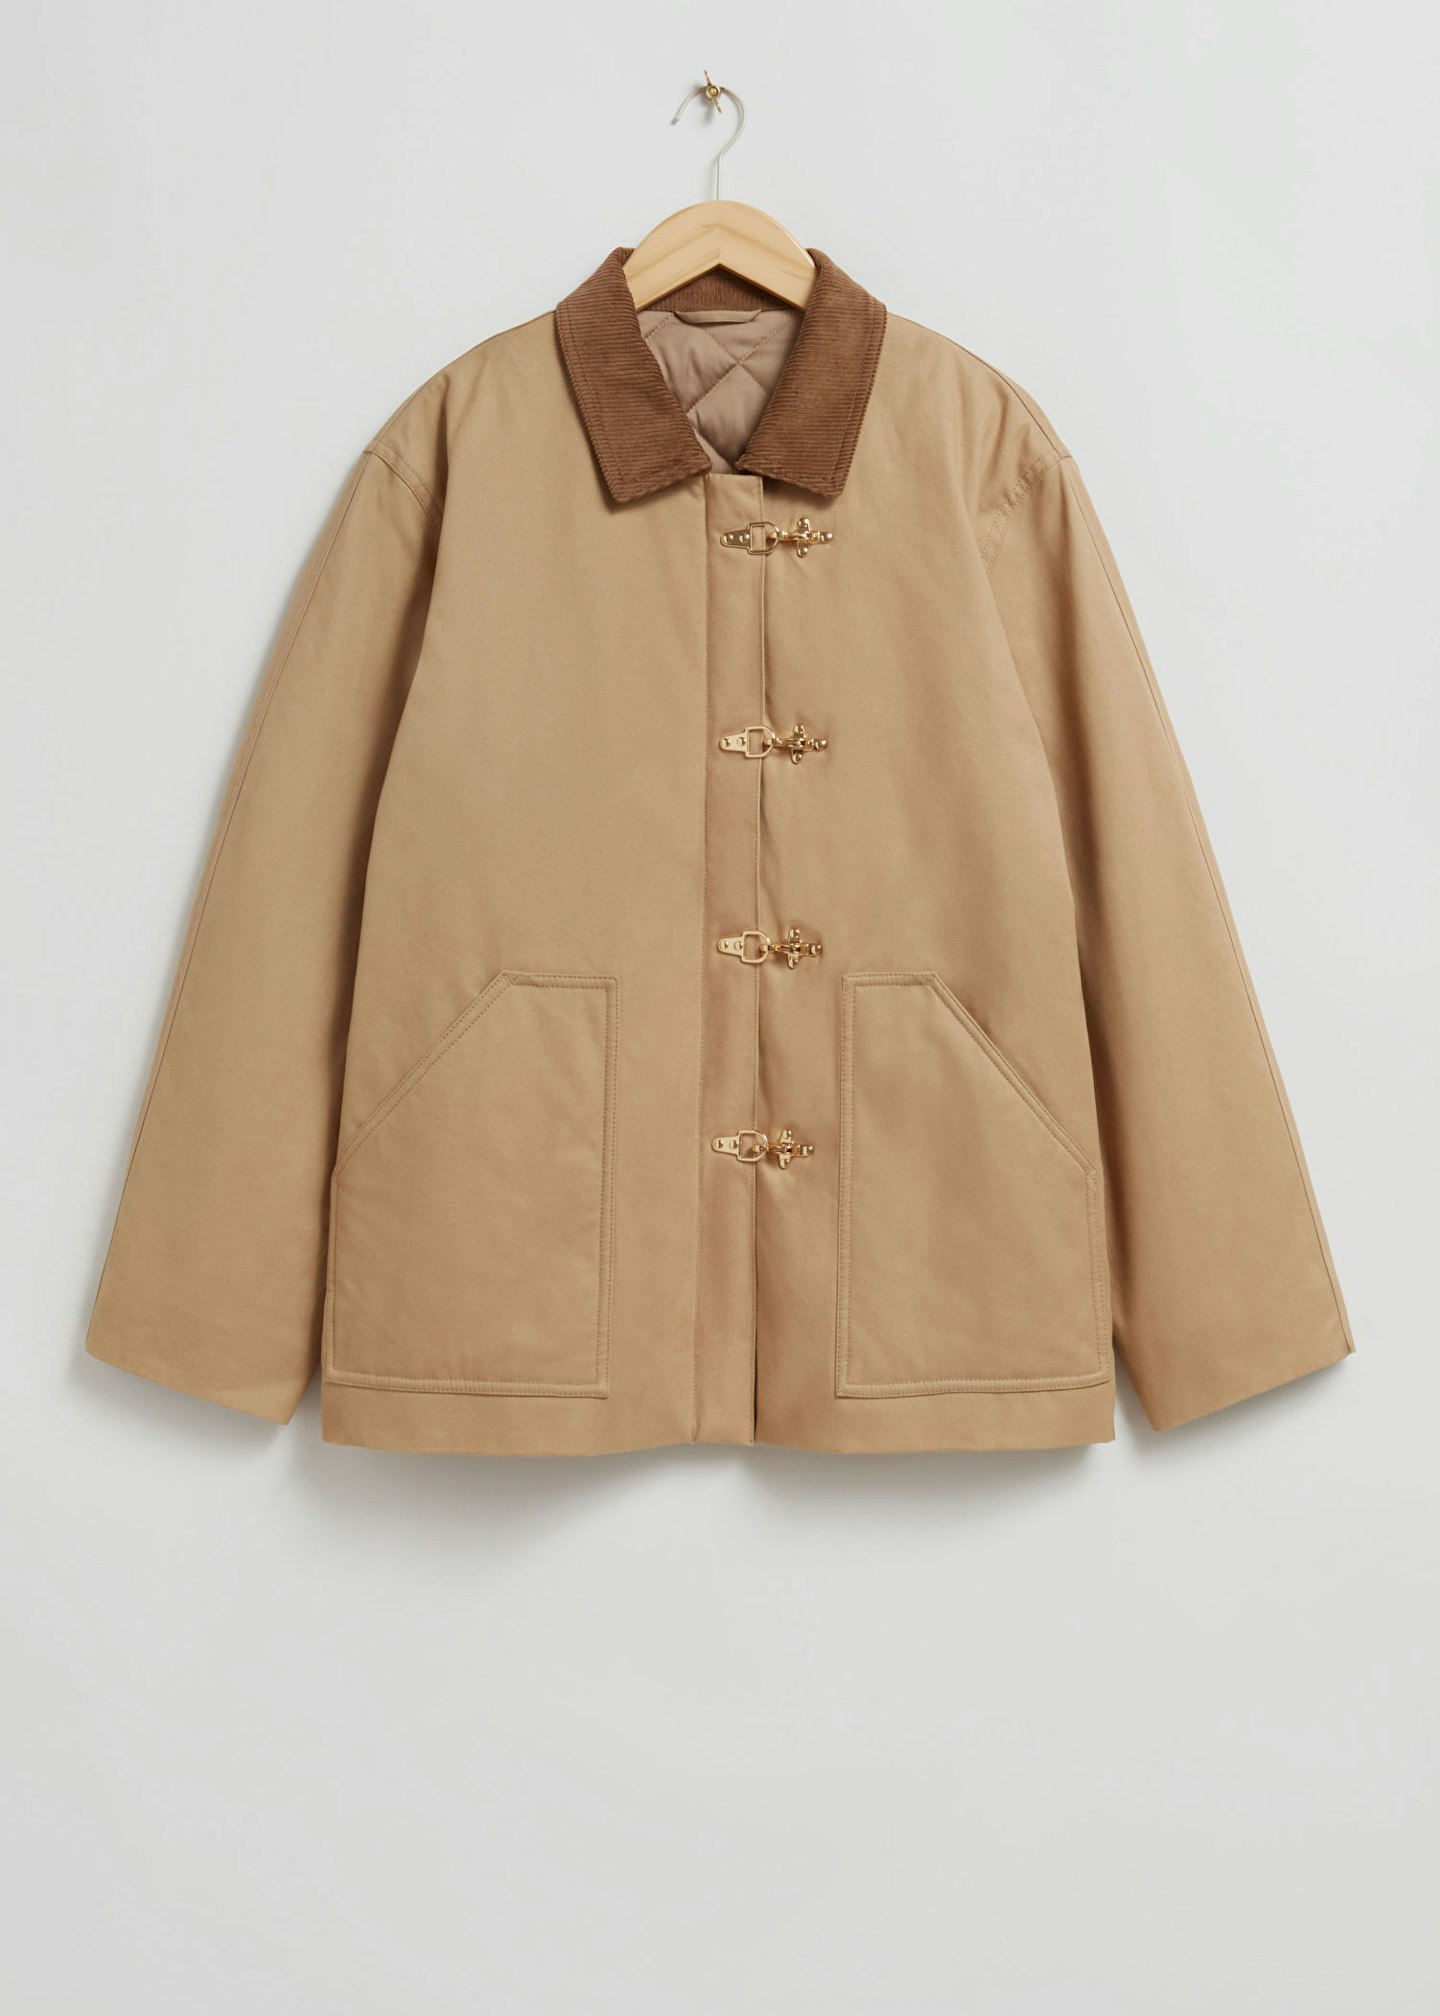 & Other Stories, Loose Duffle Jacket